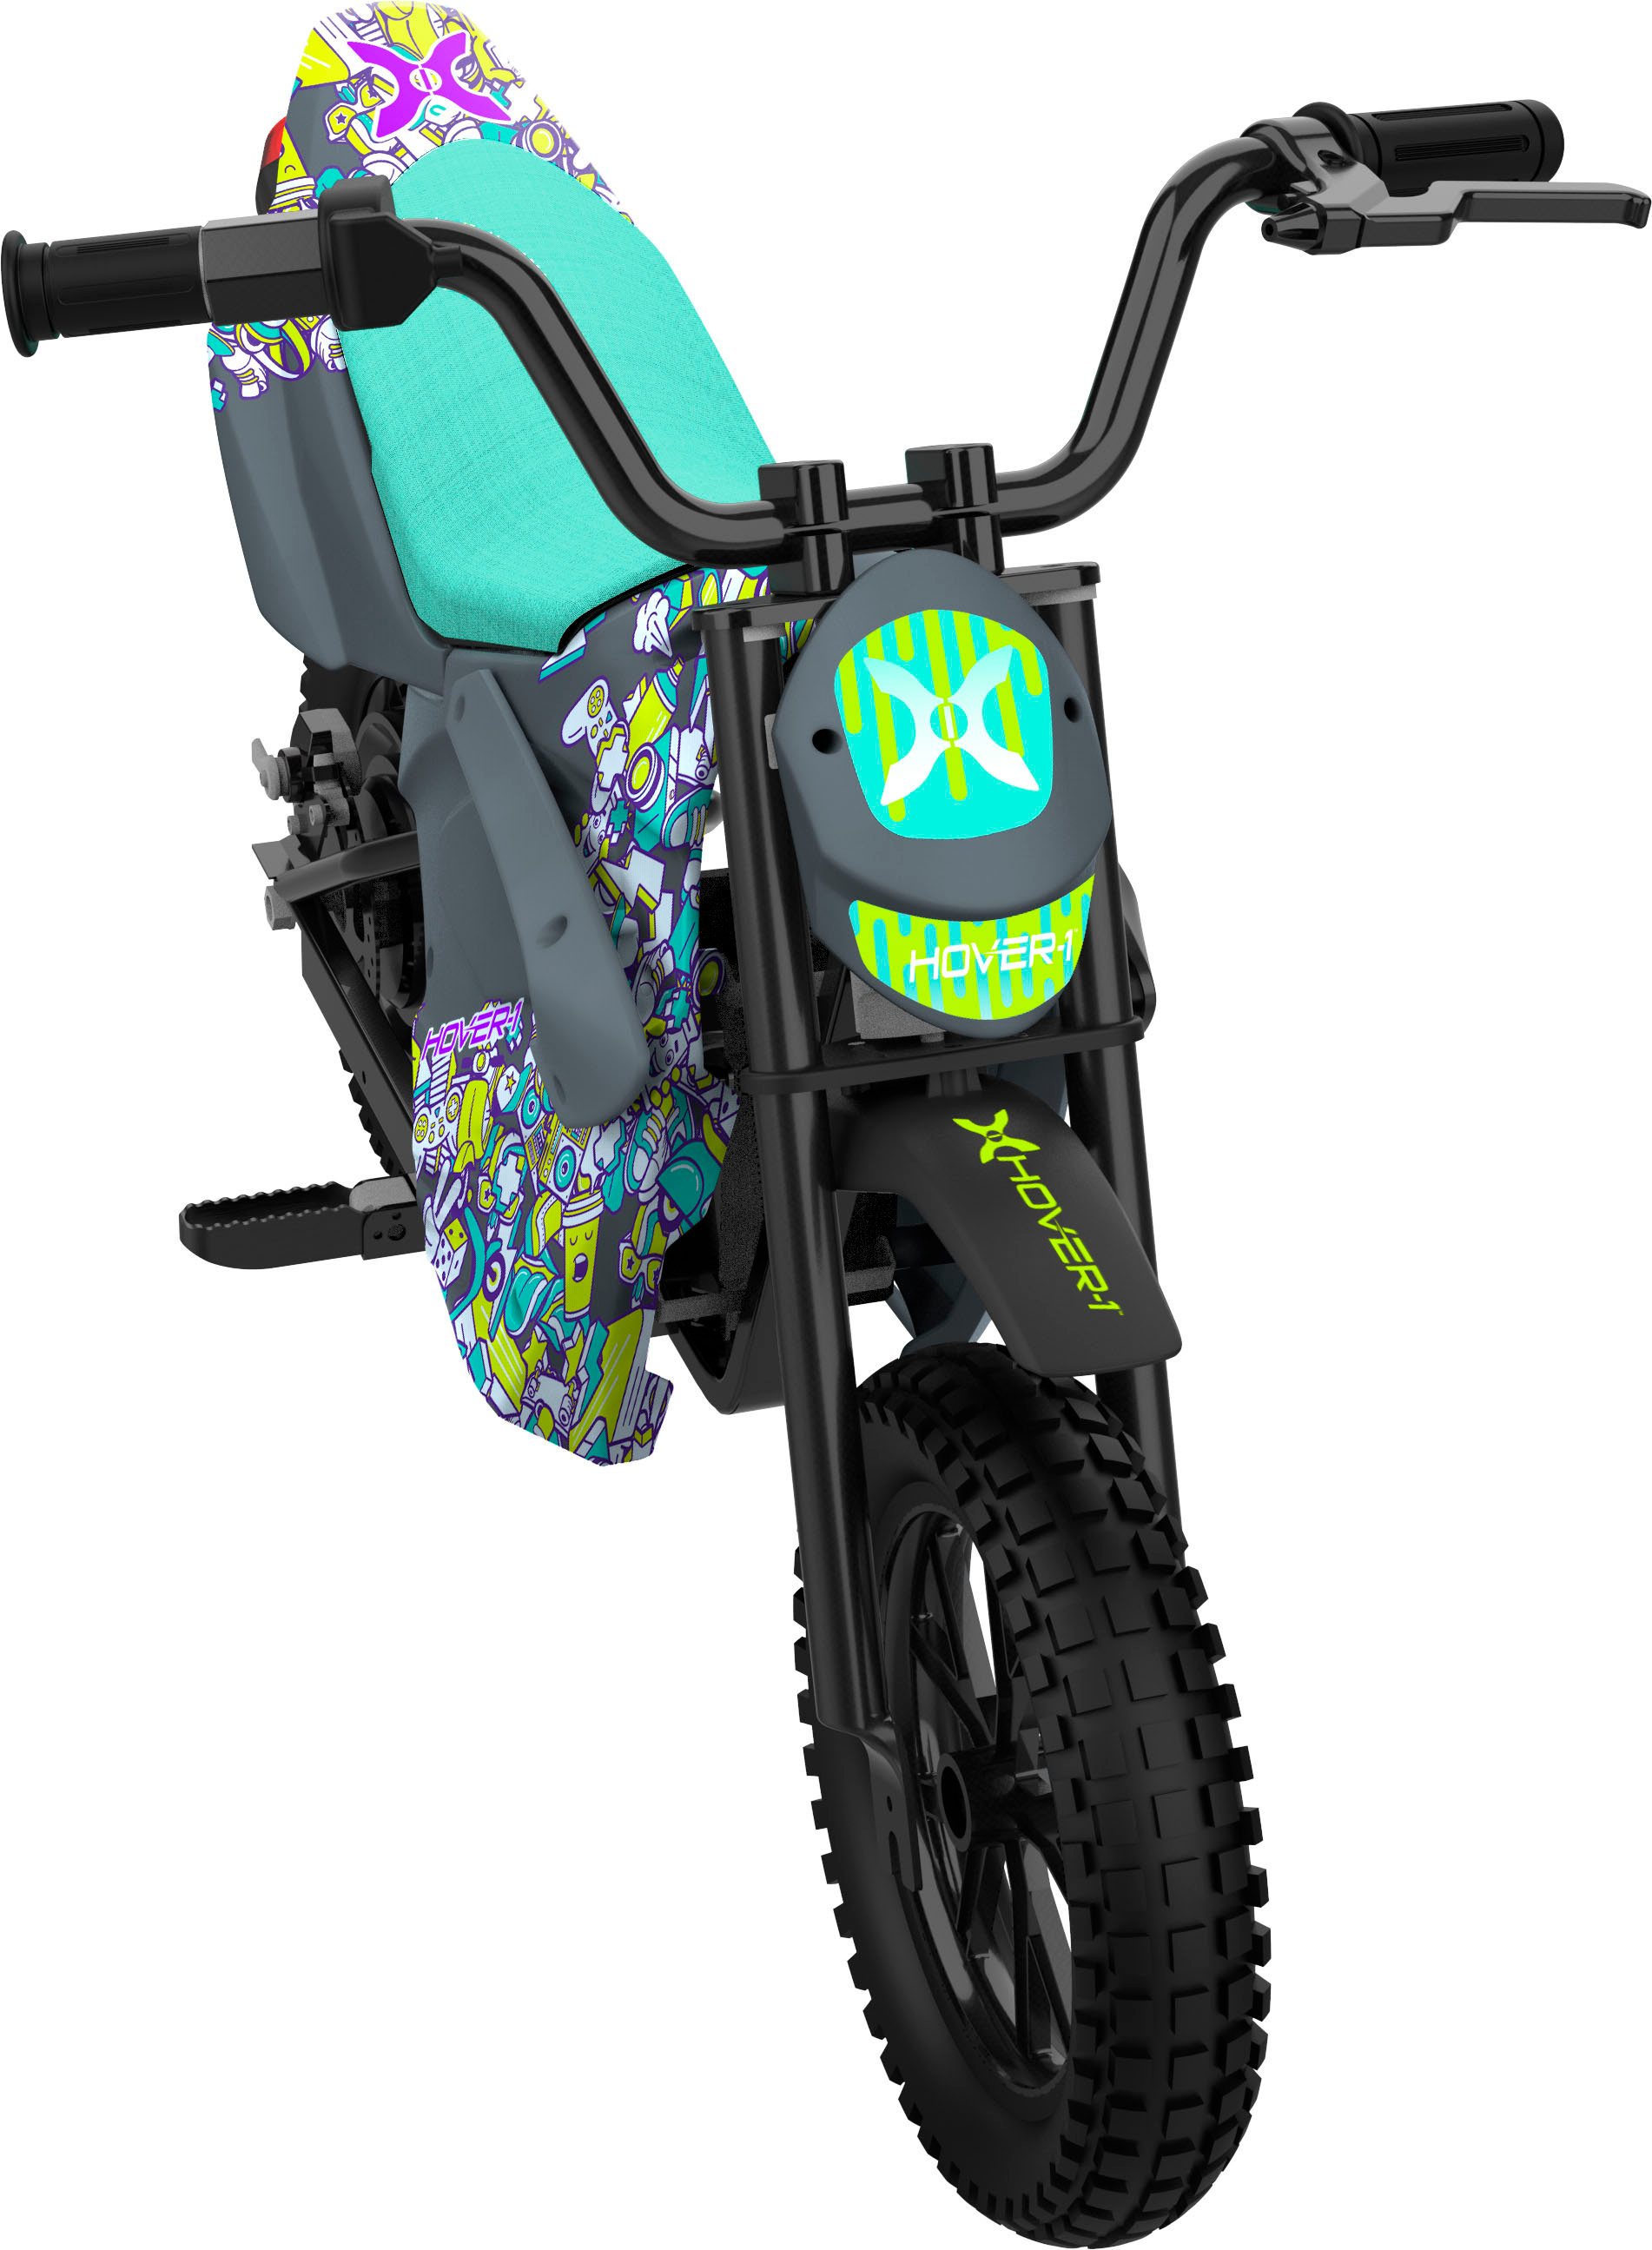 Left View: Electric Motorcycle for Kids 3-Wheel Trike - Battery Powered Fun Decals, Reverse, and Headlights by Toy Time - Green